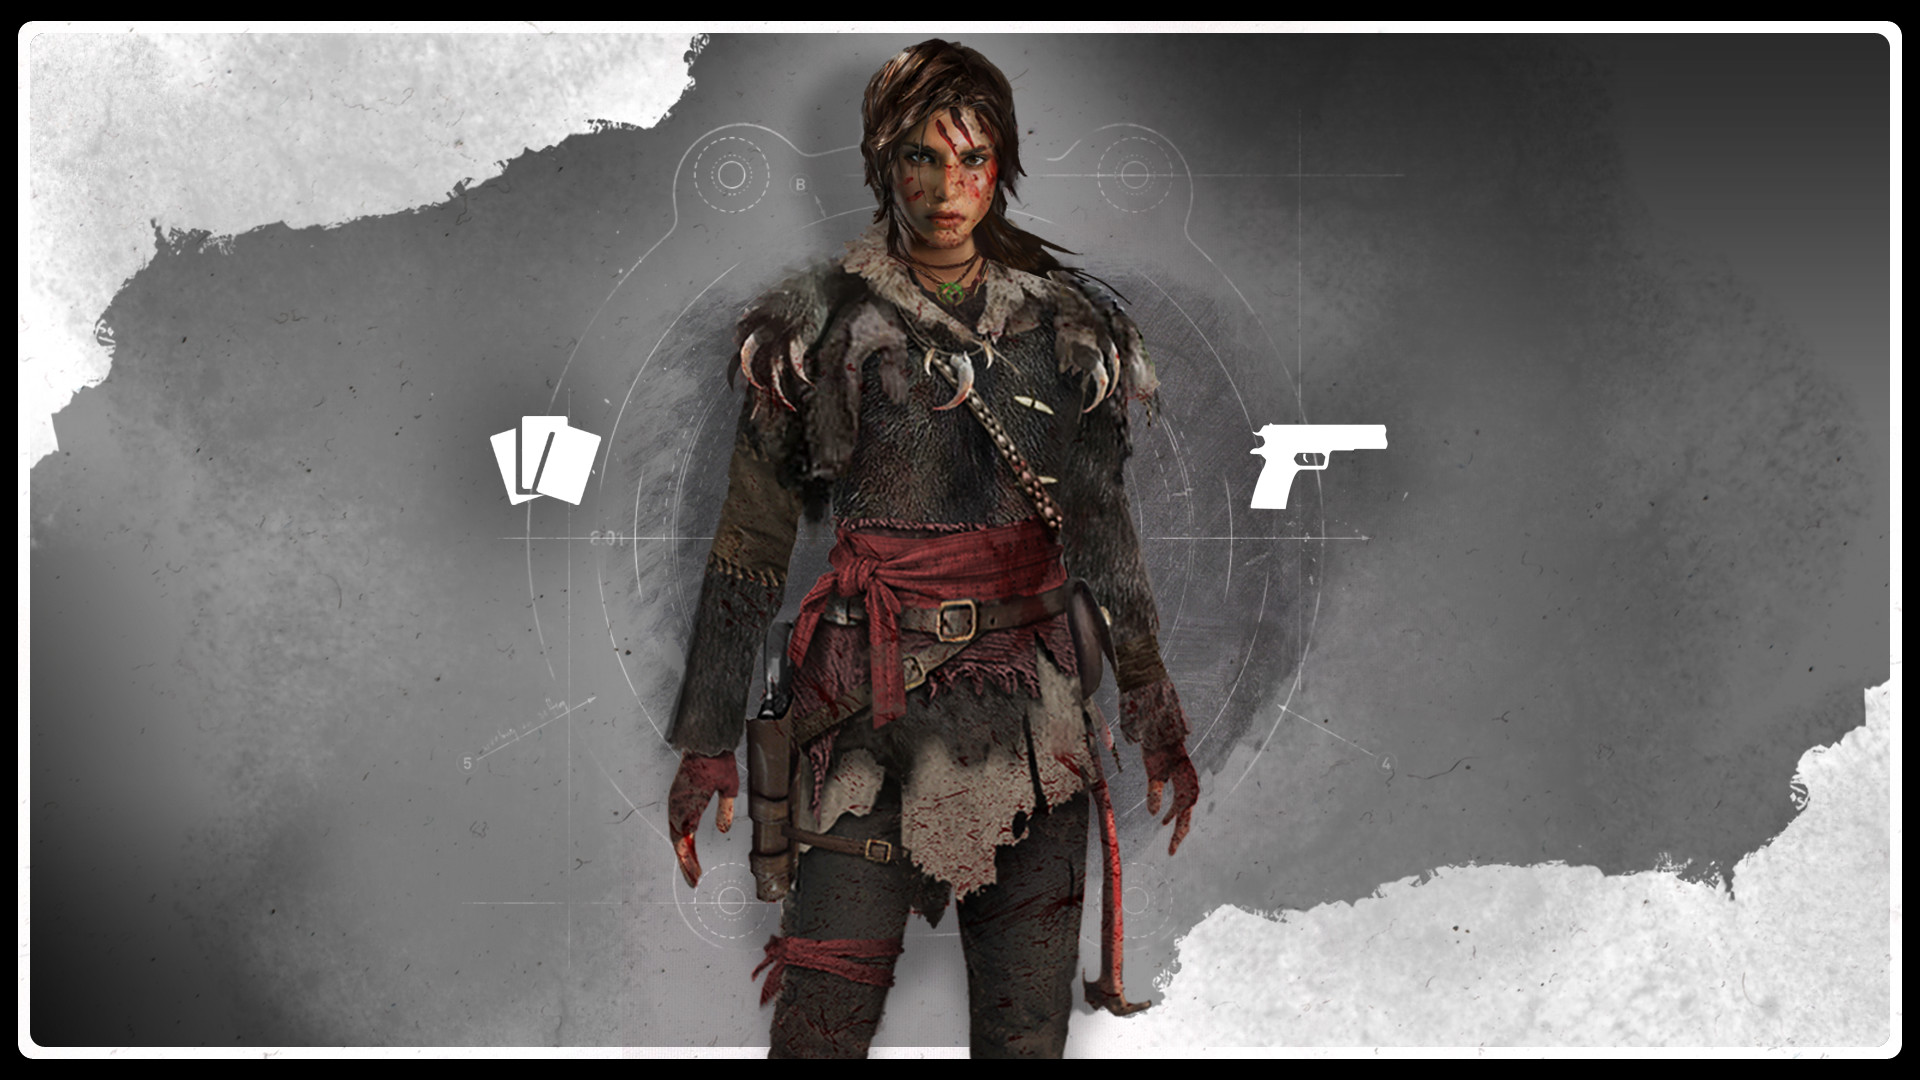 [$ 2.93] Rise of the Tomb Raider - Apex Predator Outfit Pack DLC Steam CD Key